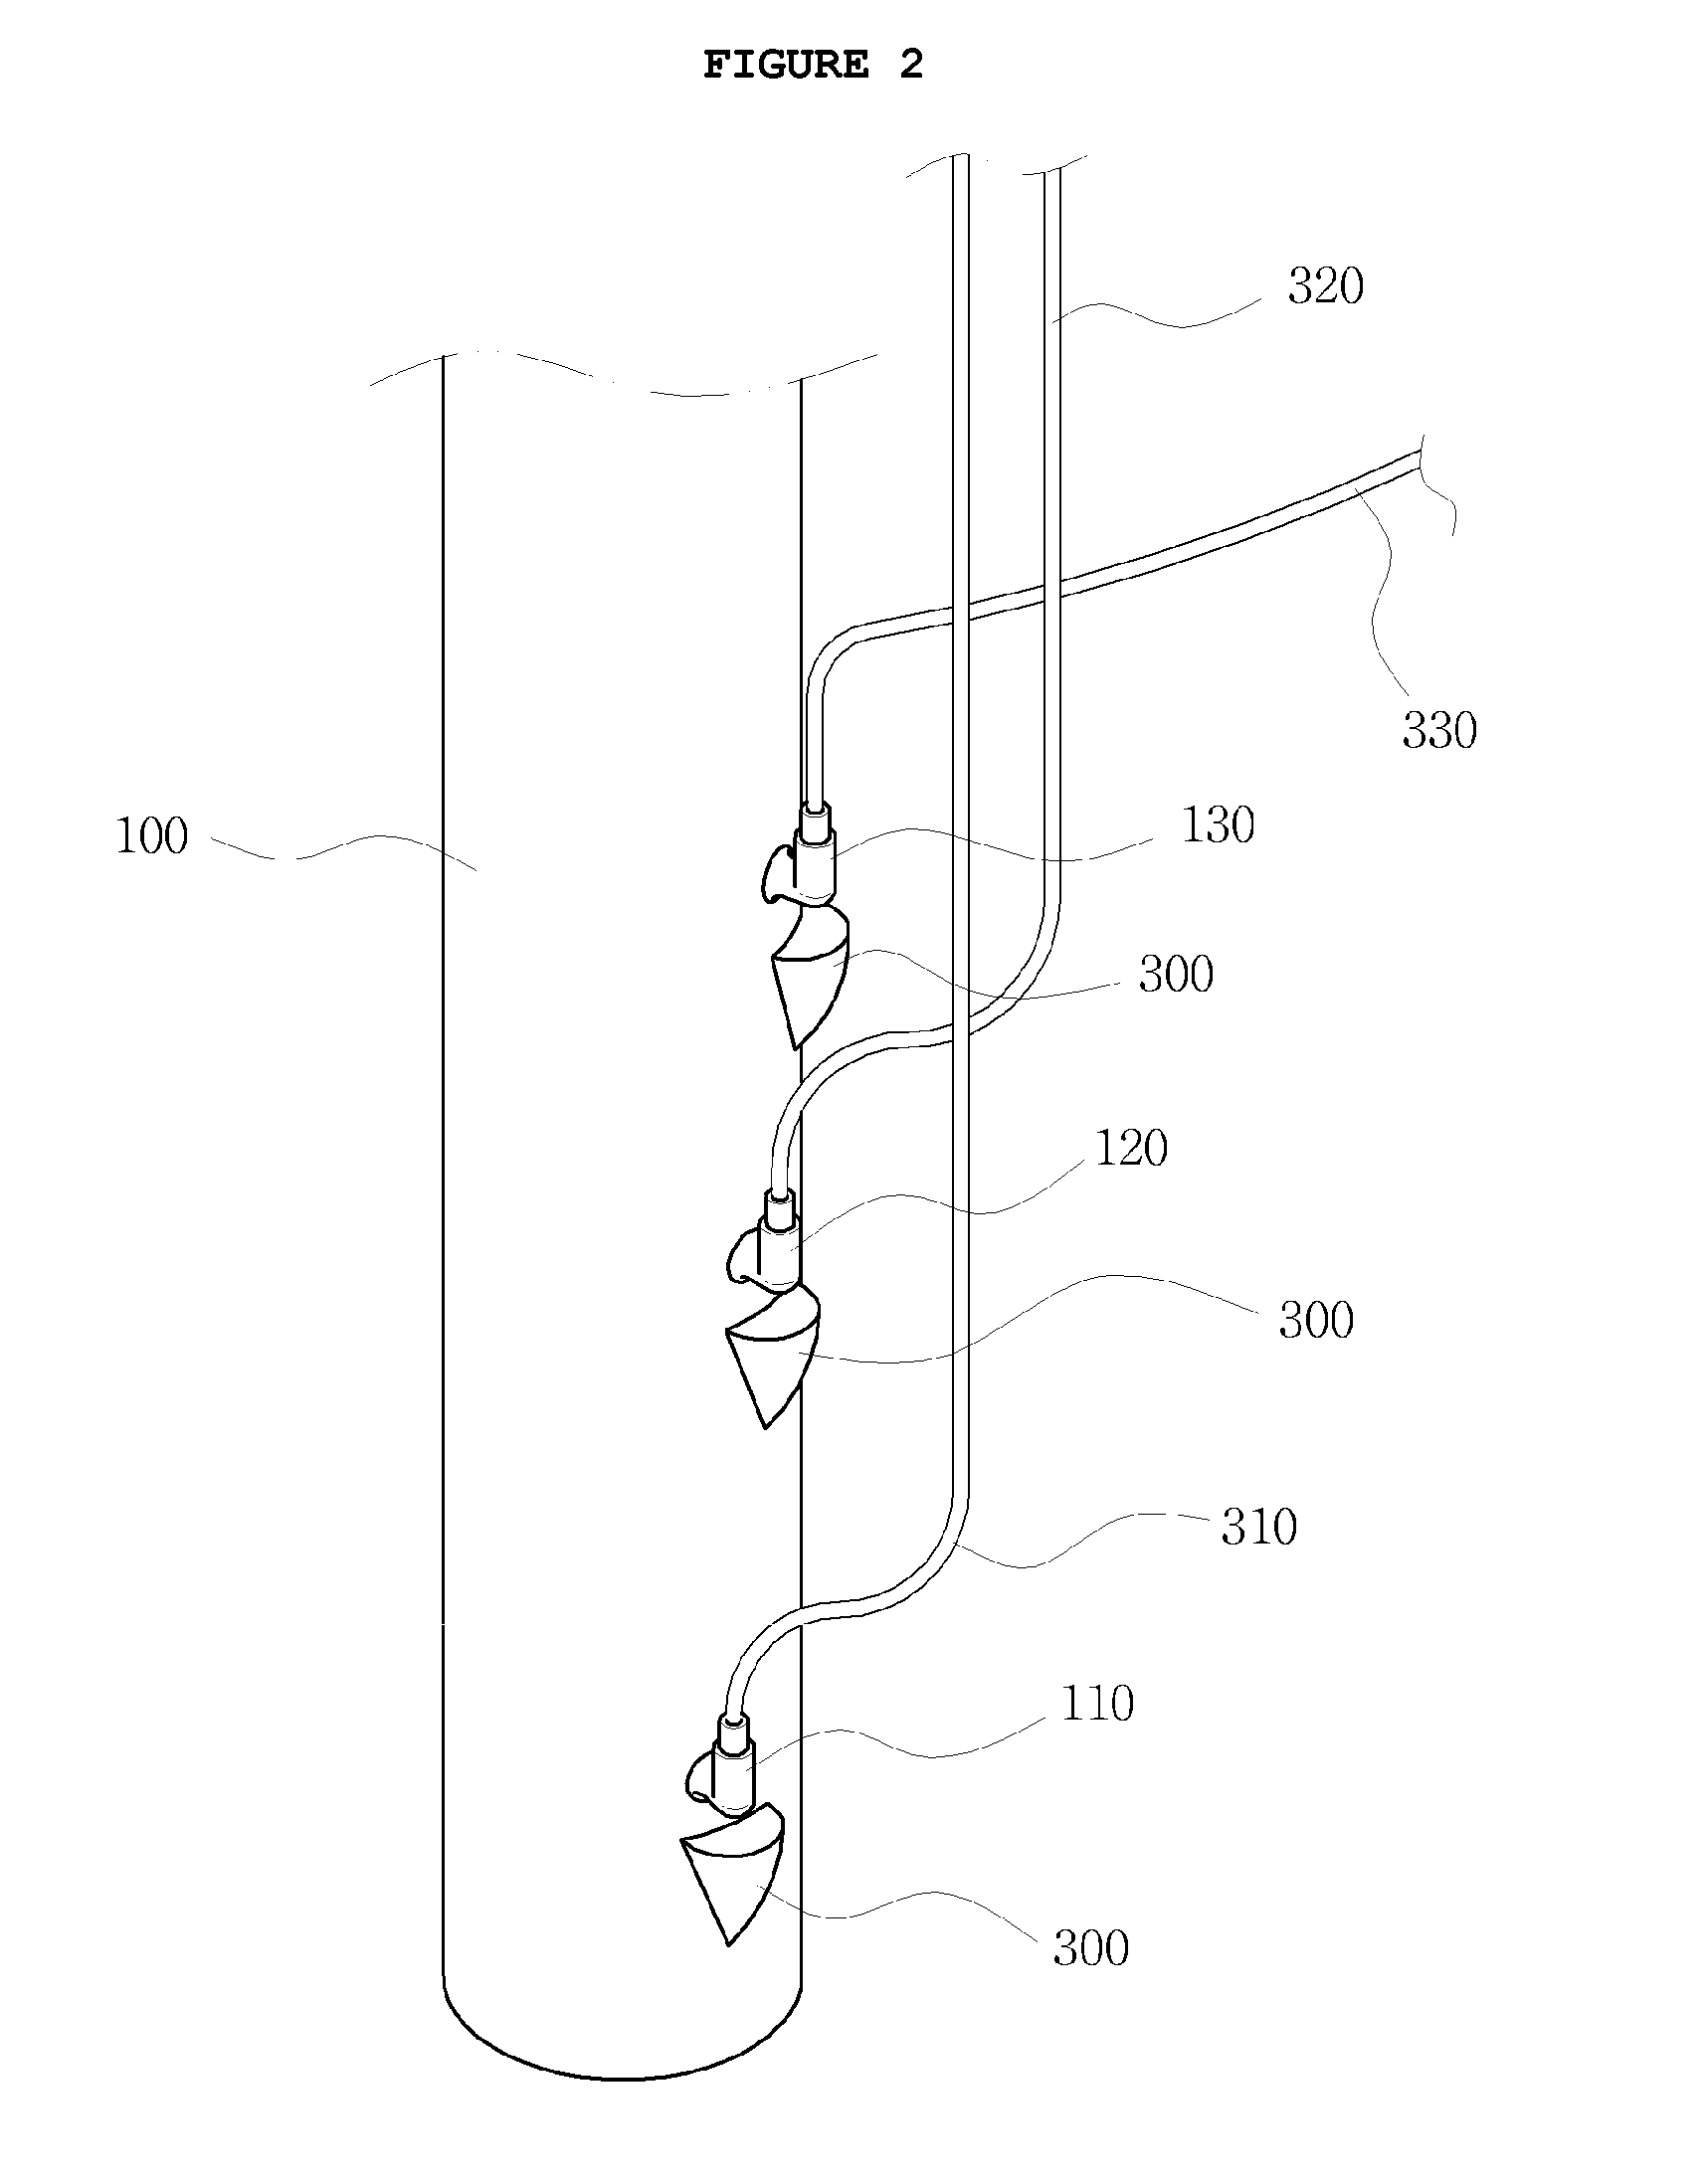 Apparatus for measuring saturated hydraulic conductivity of unsaturated porous media